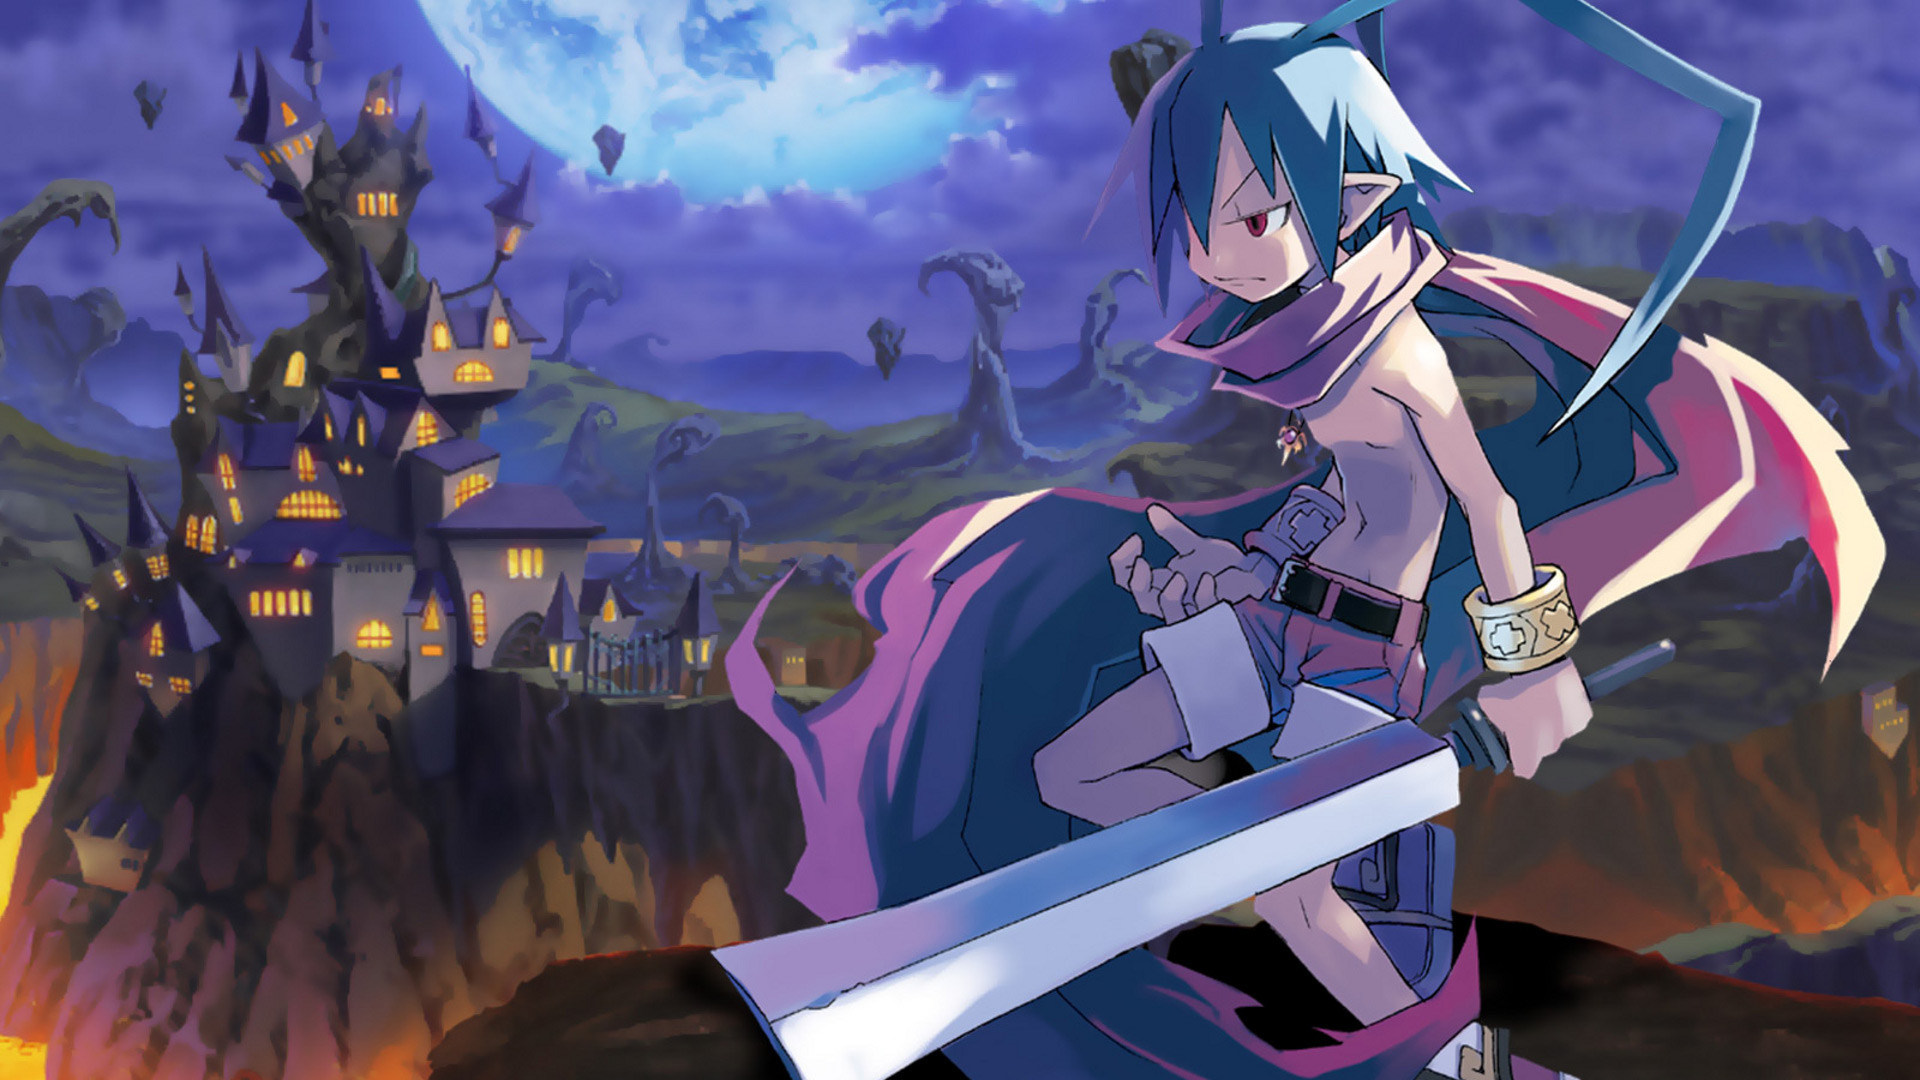 1920x1080 2 Disgaea: Hour of Darkness HD Wallpapers | Backgrounds - Wallpaper Abyss